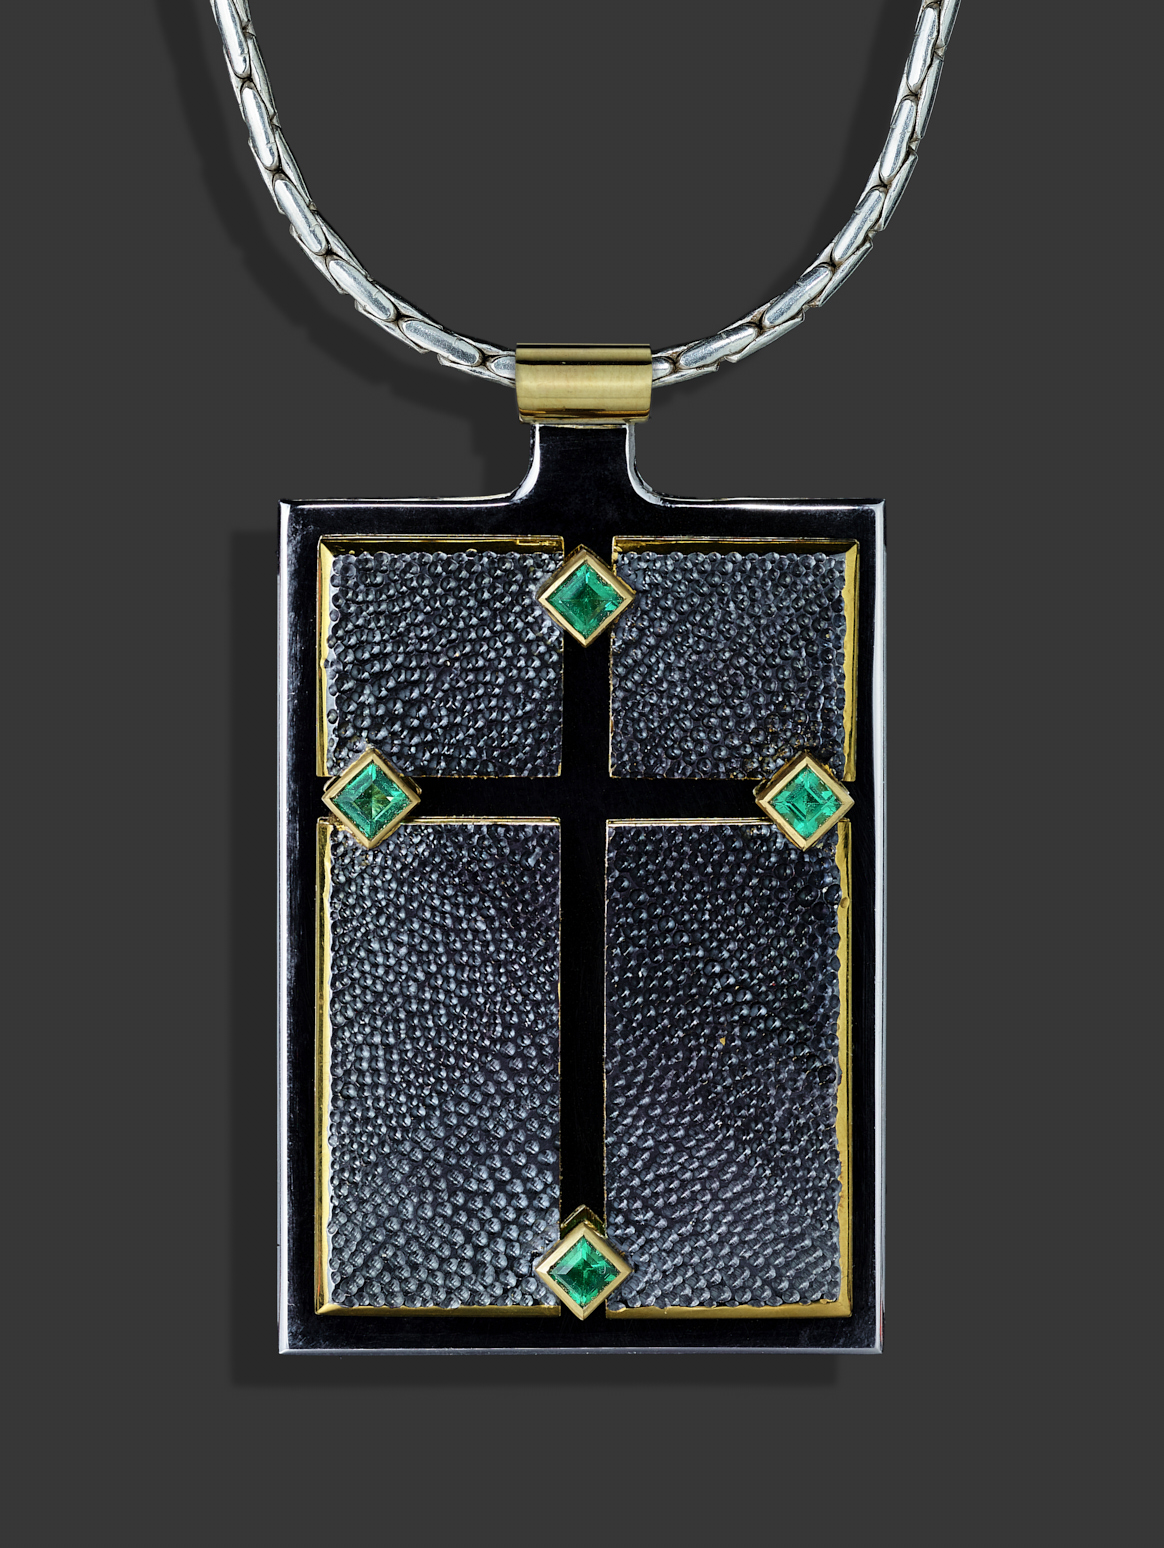 <a href="/node/299">Emerald Cross / Silver / 18ct gold / 4 Emeralds / Gilding / Rhodium plate. The “Cross” we see is actually empty space and therefore is “nothing” as opposed to the “something” of the four textured top panels. Photo : Simon B Armitt.</a>